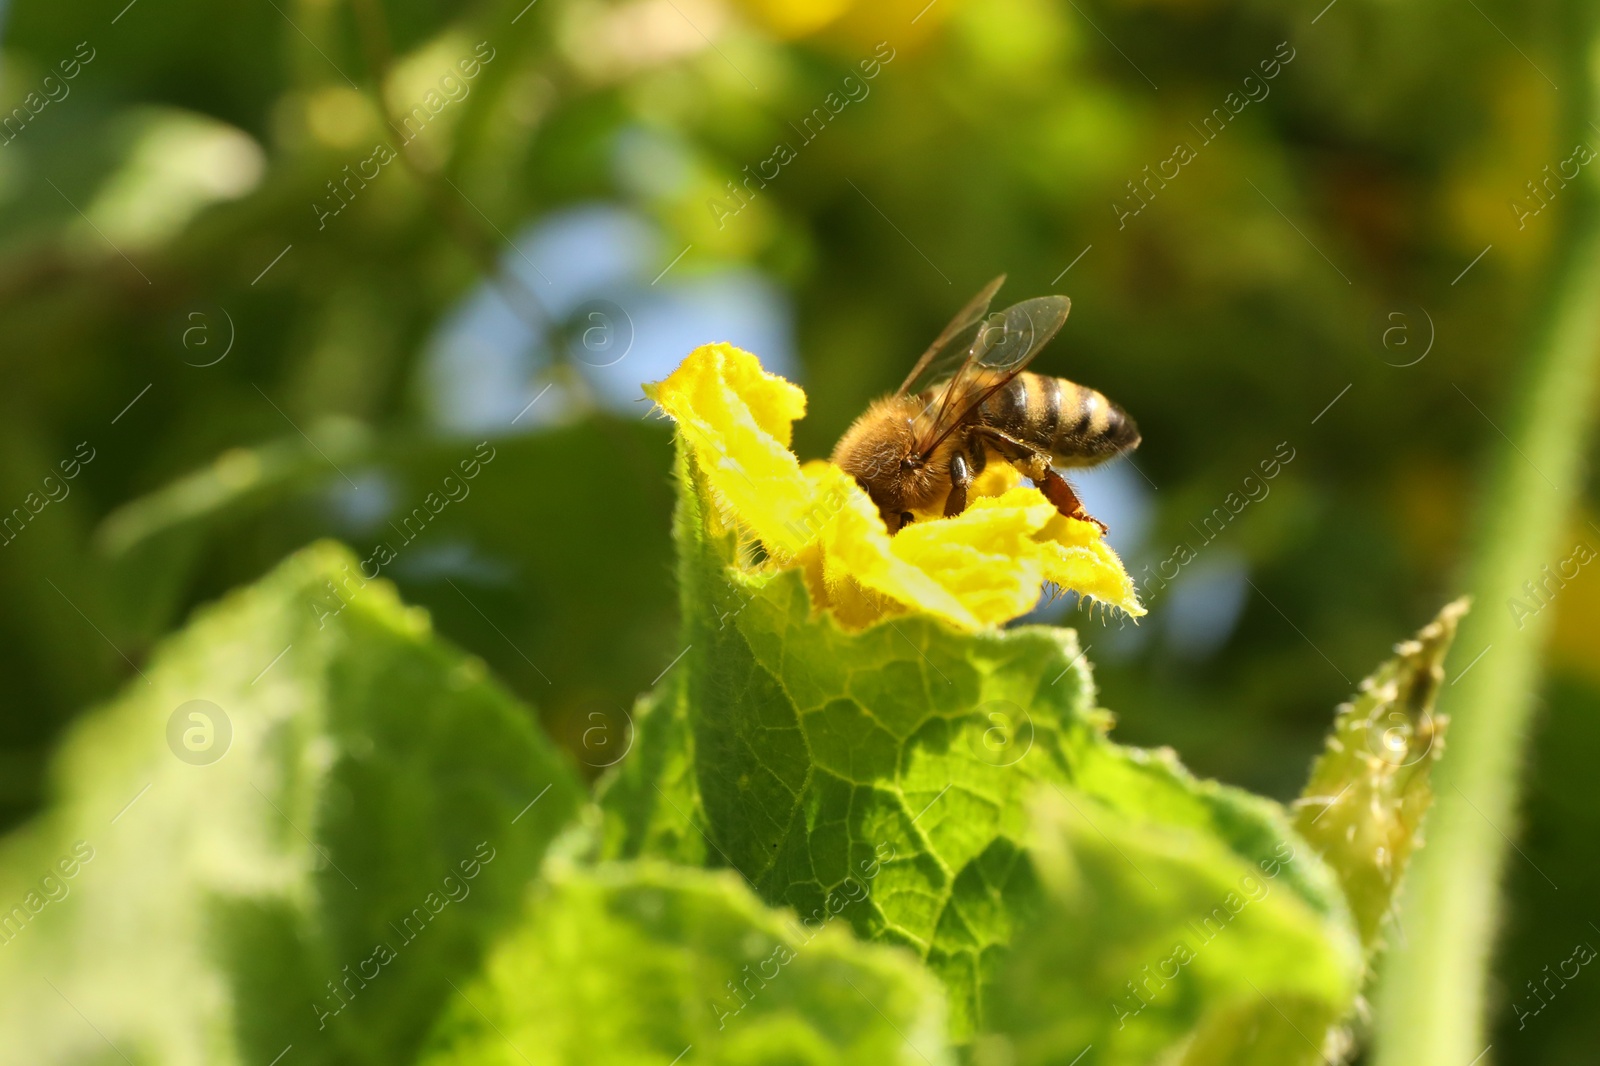 Photo of Honeybee collecting nectar from yellow flower outdoors, closeup